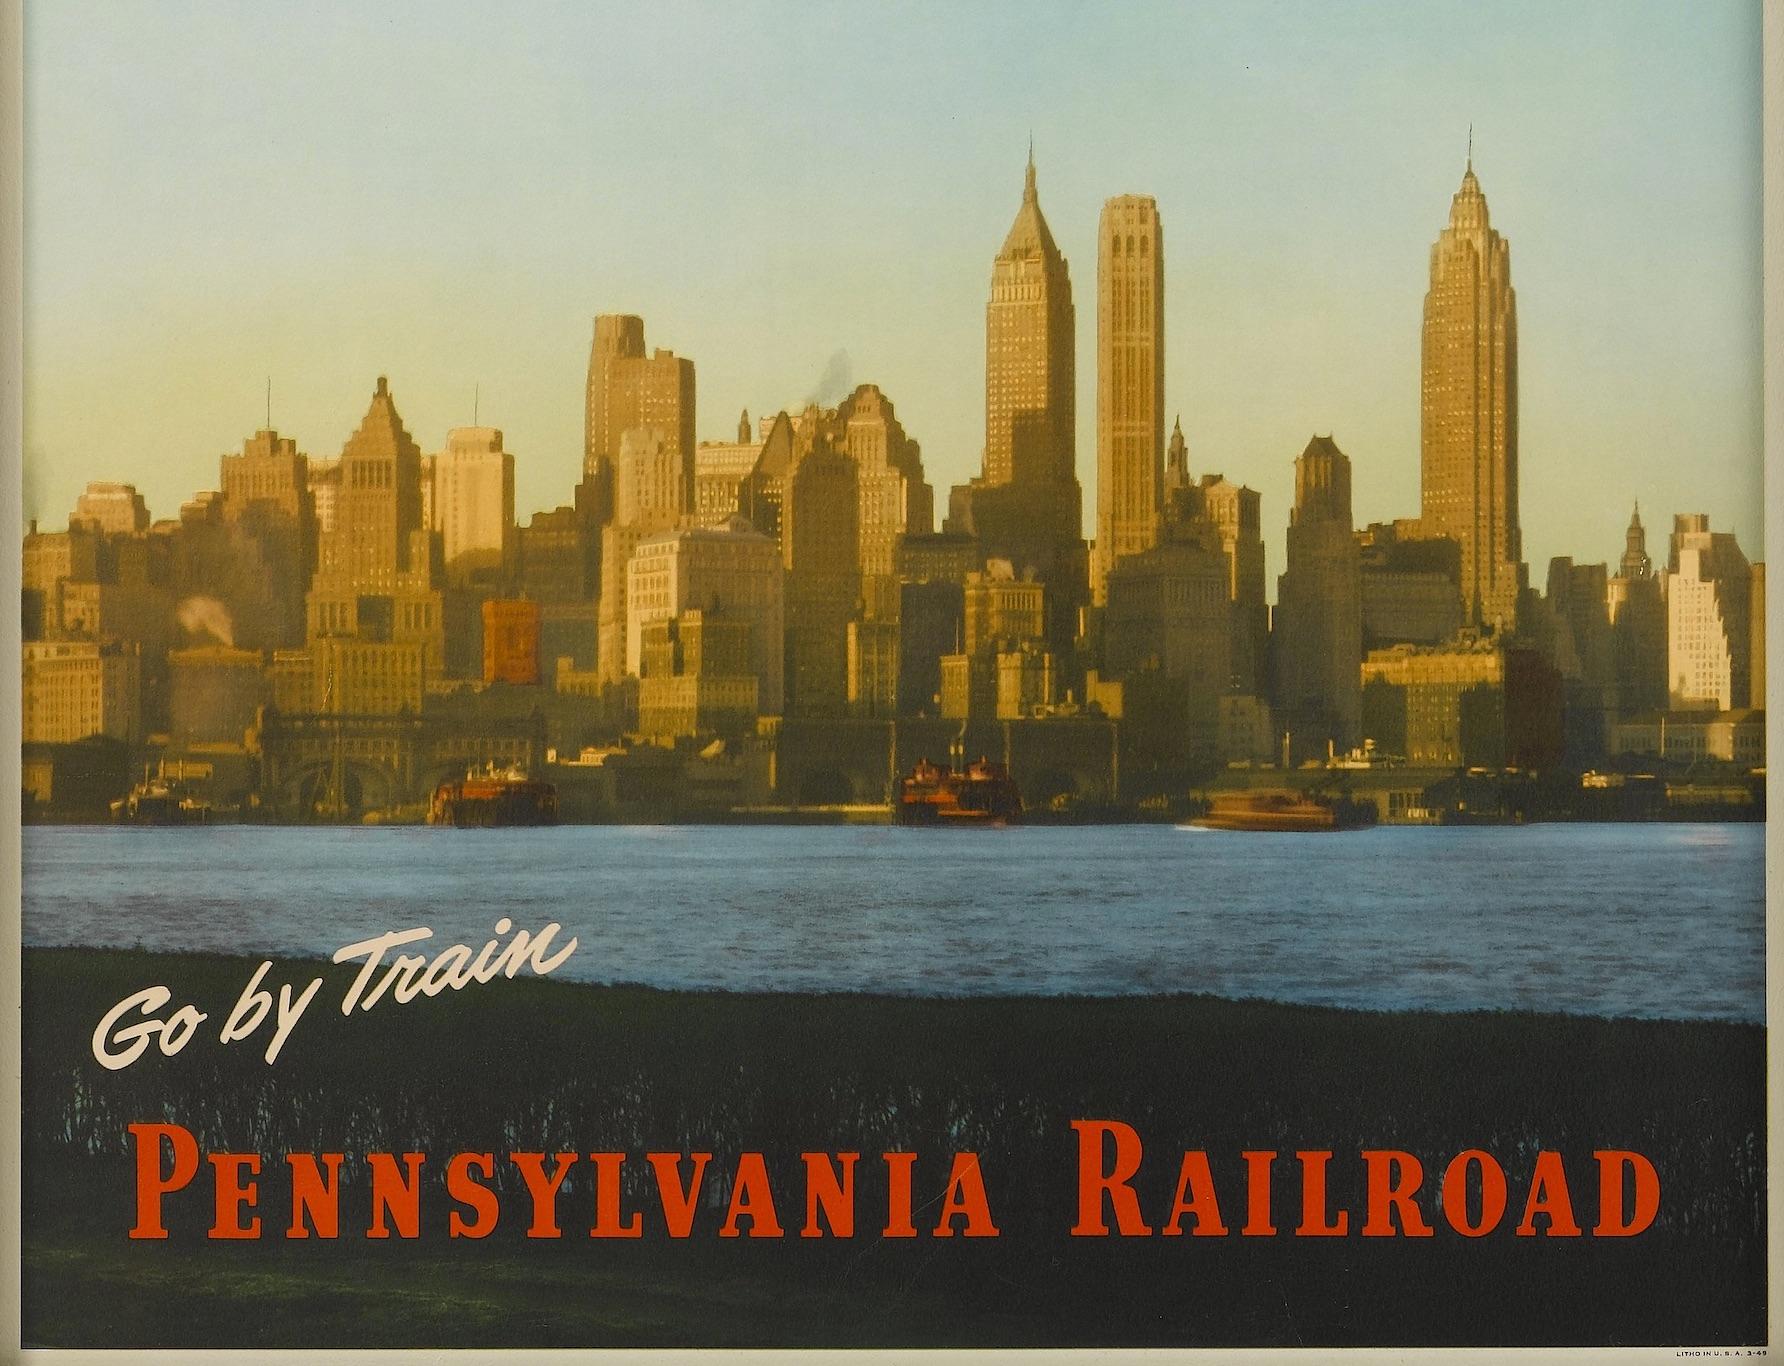 This vintage travel poster was printed for the Pennsylvania Railroad and advertised New York City as one of their alluring travel destinations. 

The Pennsylvania Railroad was founded in 1846. Commonly referred to as the “Pennsy,” the PRR was